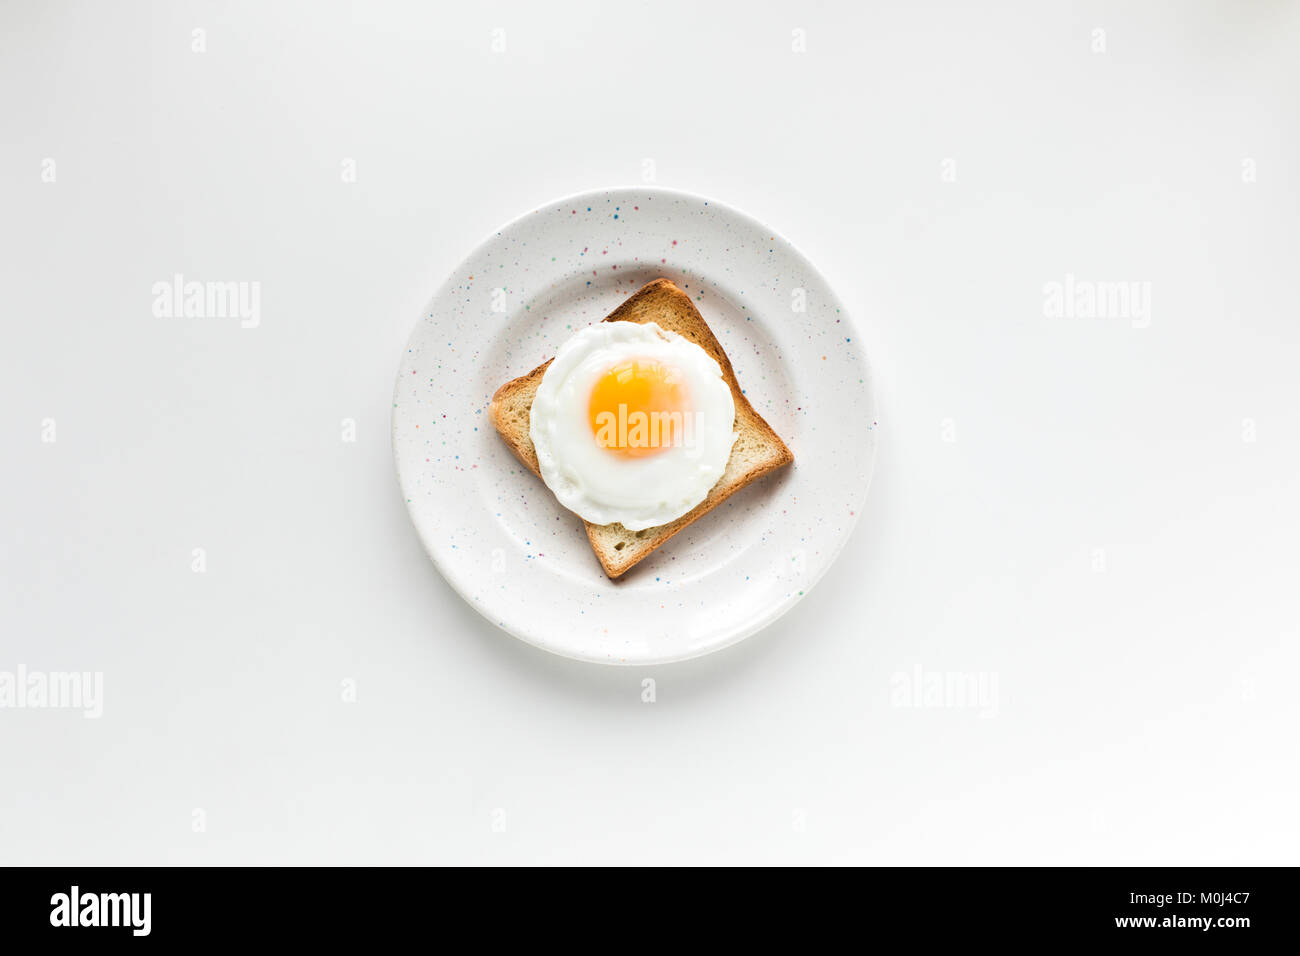 breakfast with fried egg on toast Stock Photo